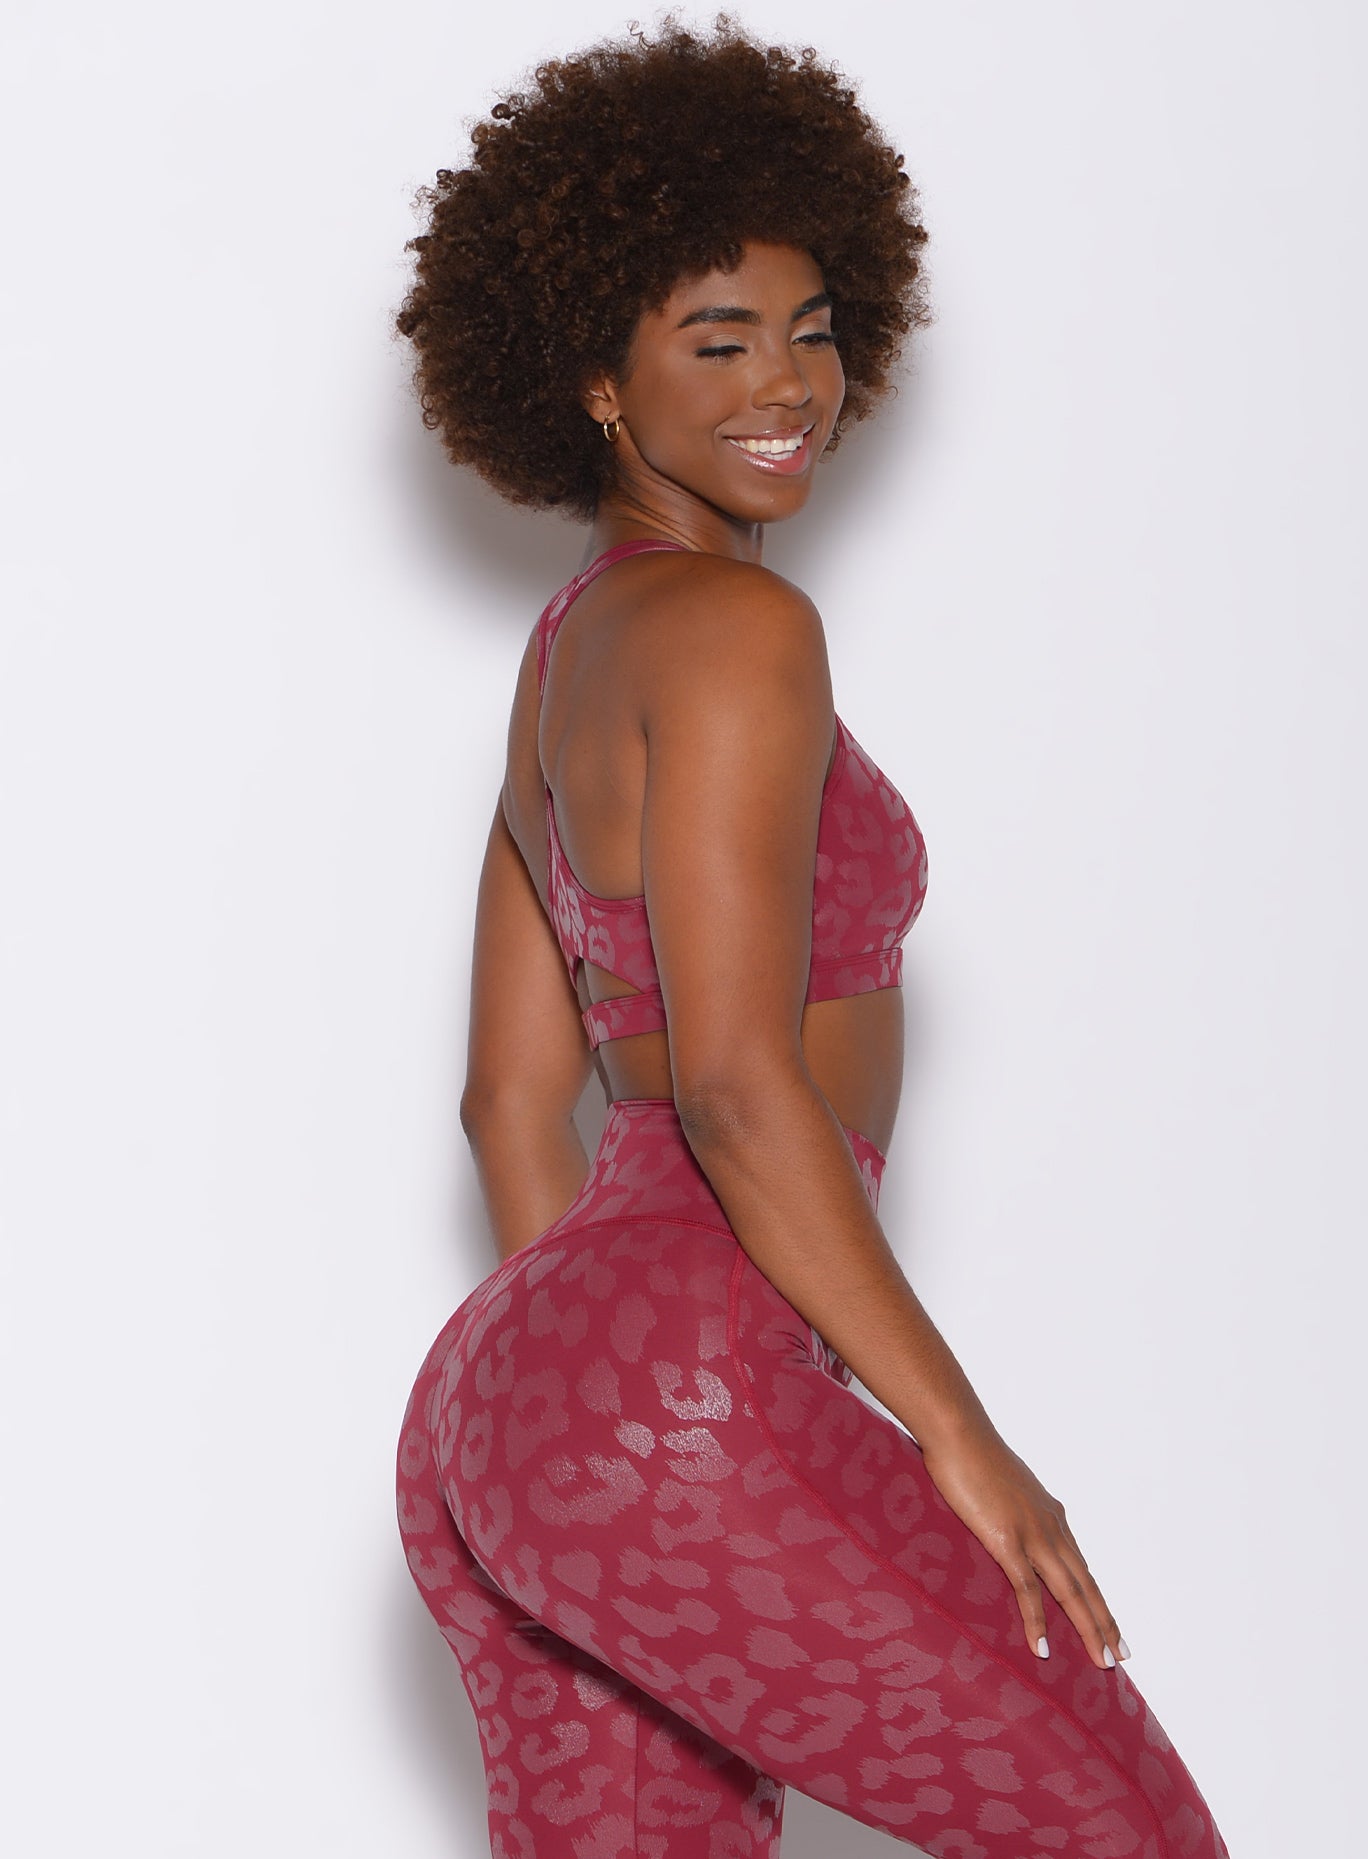 right side profile view of a model wearing our shine leopard bra in Raspberry Leopard color along with the matching leopard print leggings